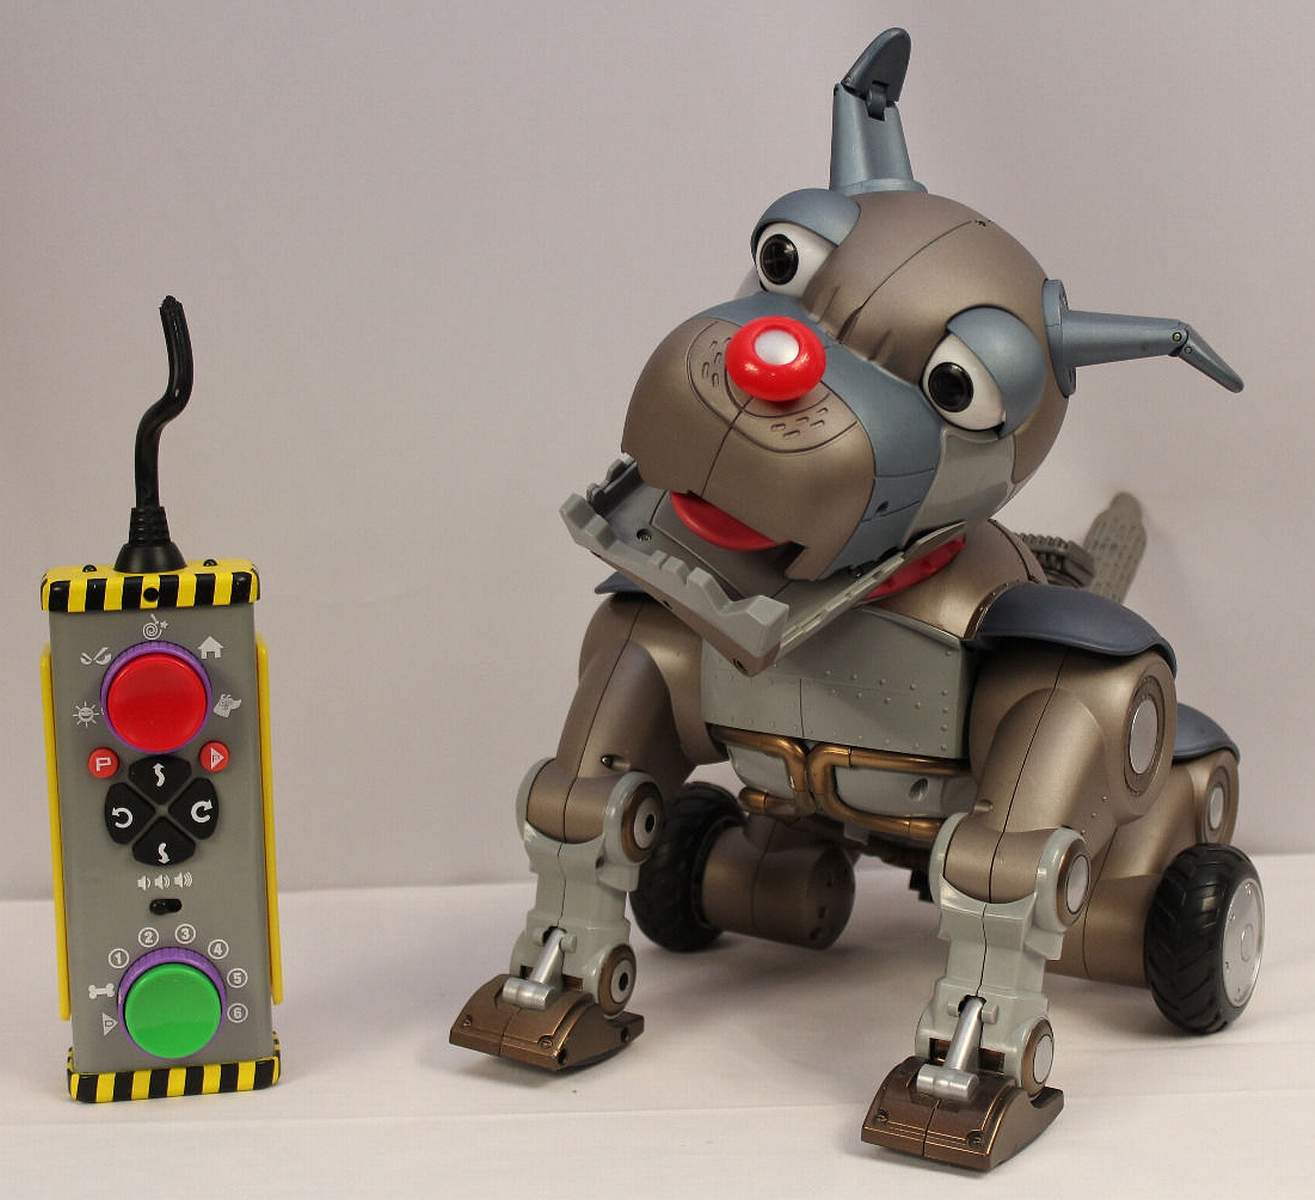 Wrex the Dawg Robot by Wow-Wee - The 